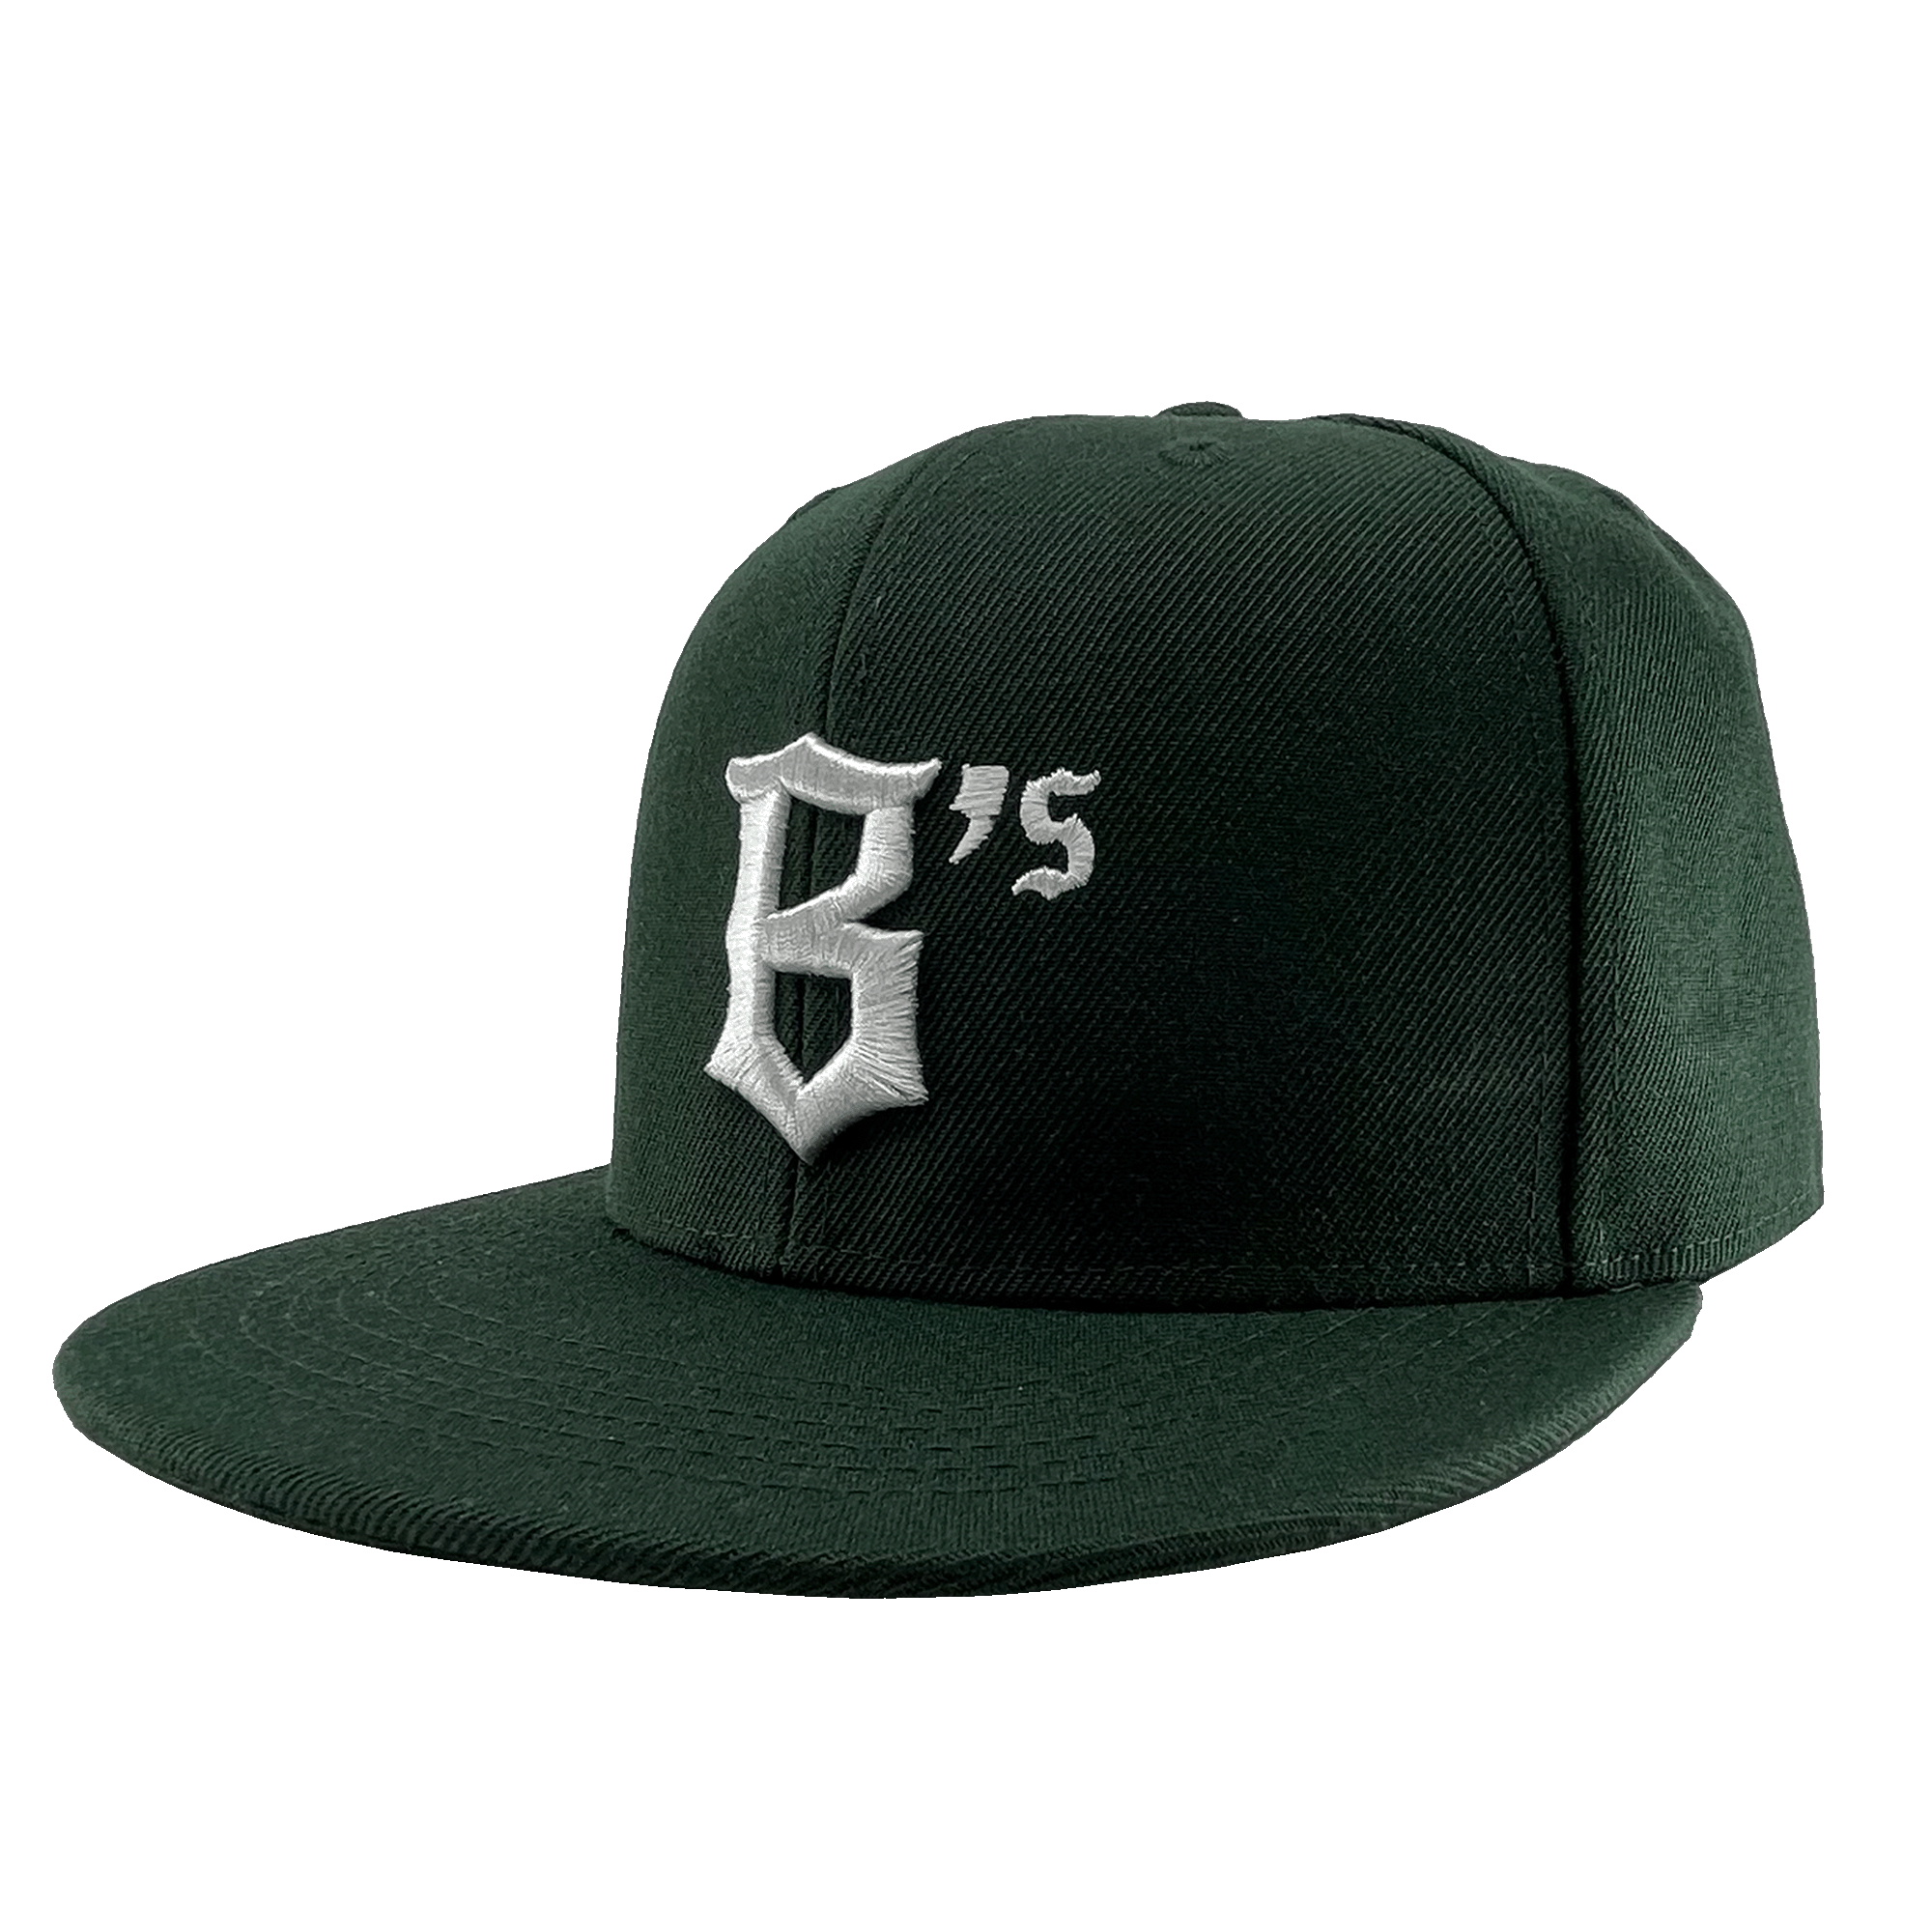 Angled side view of a forest green hat with a green bill and white B’s logo on the front crown.